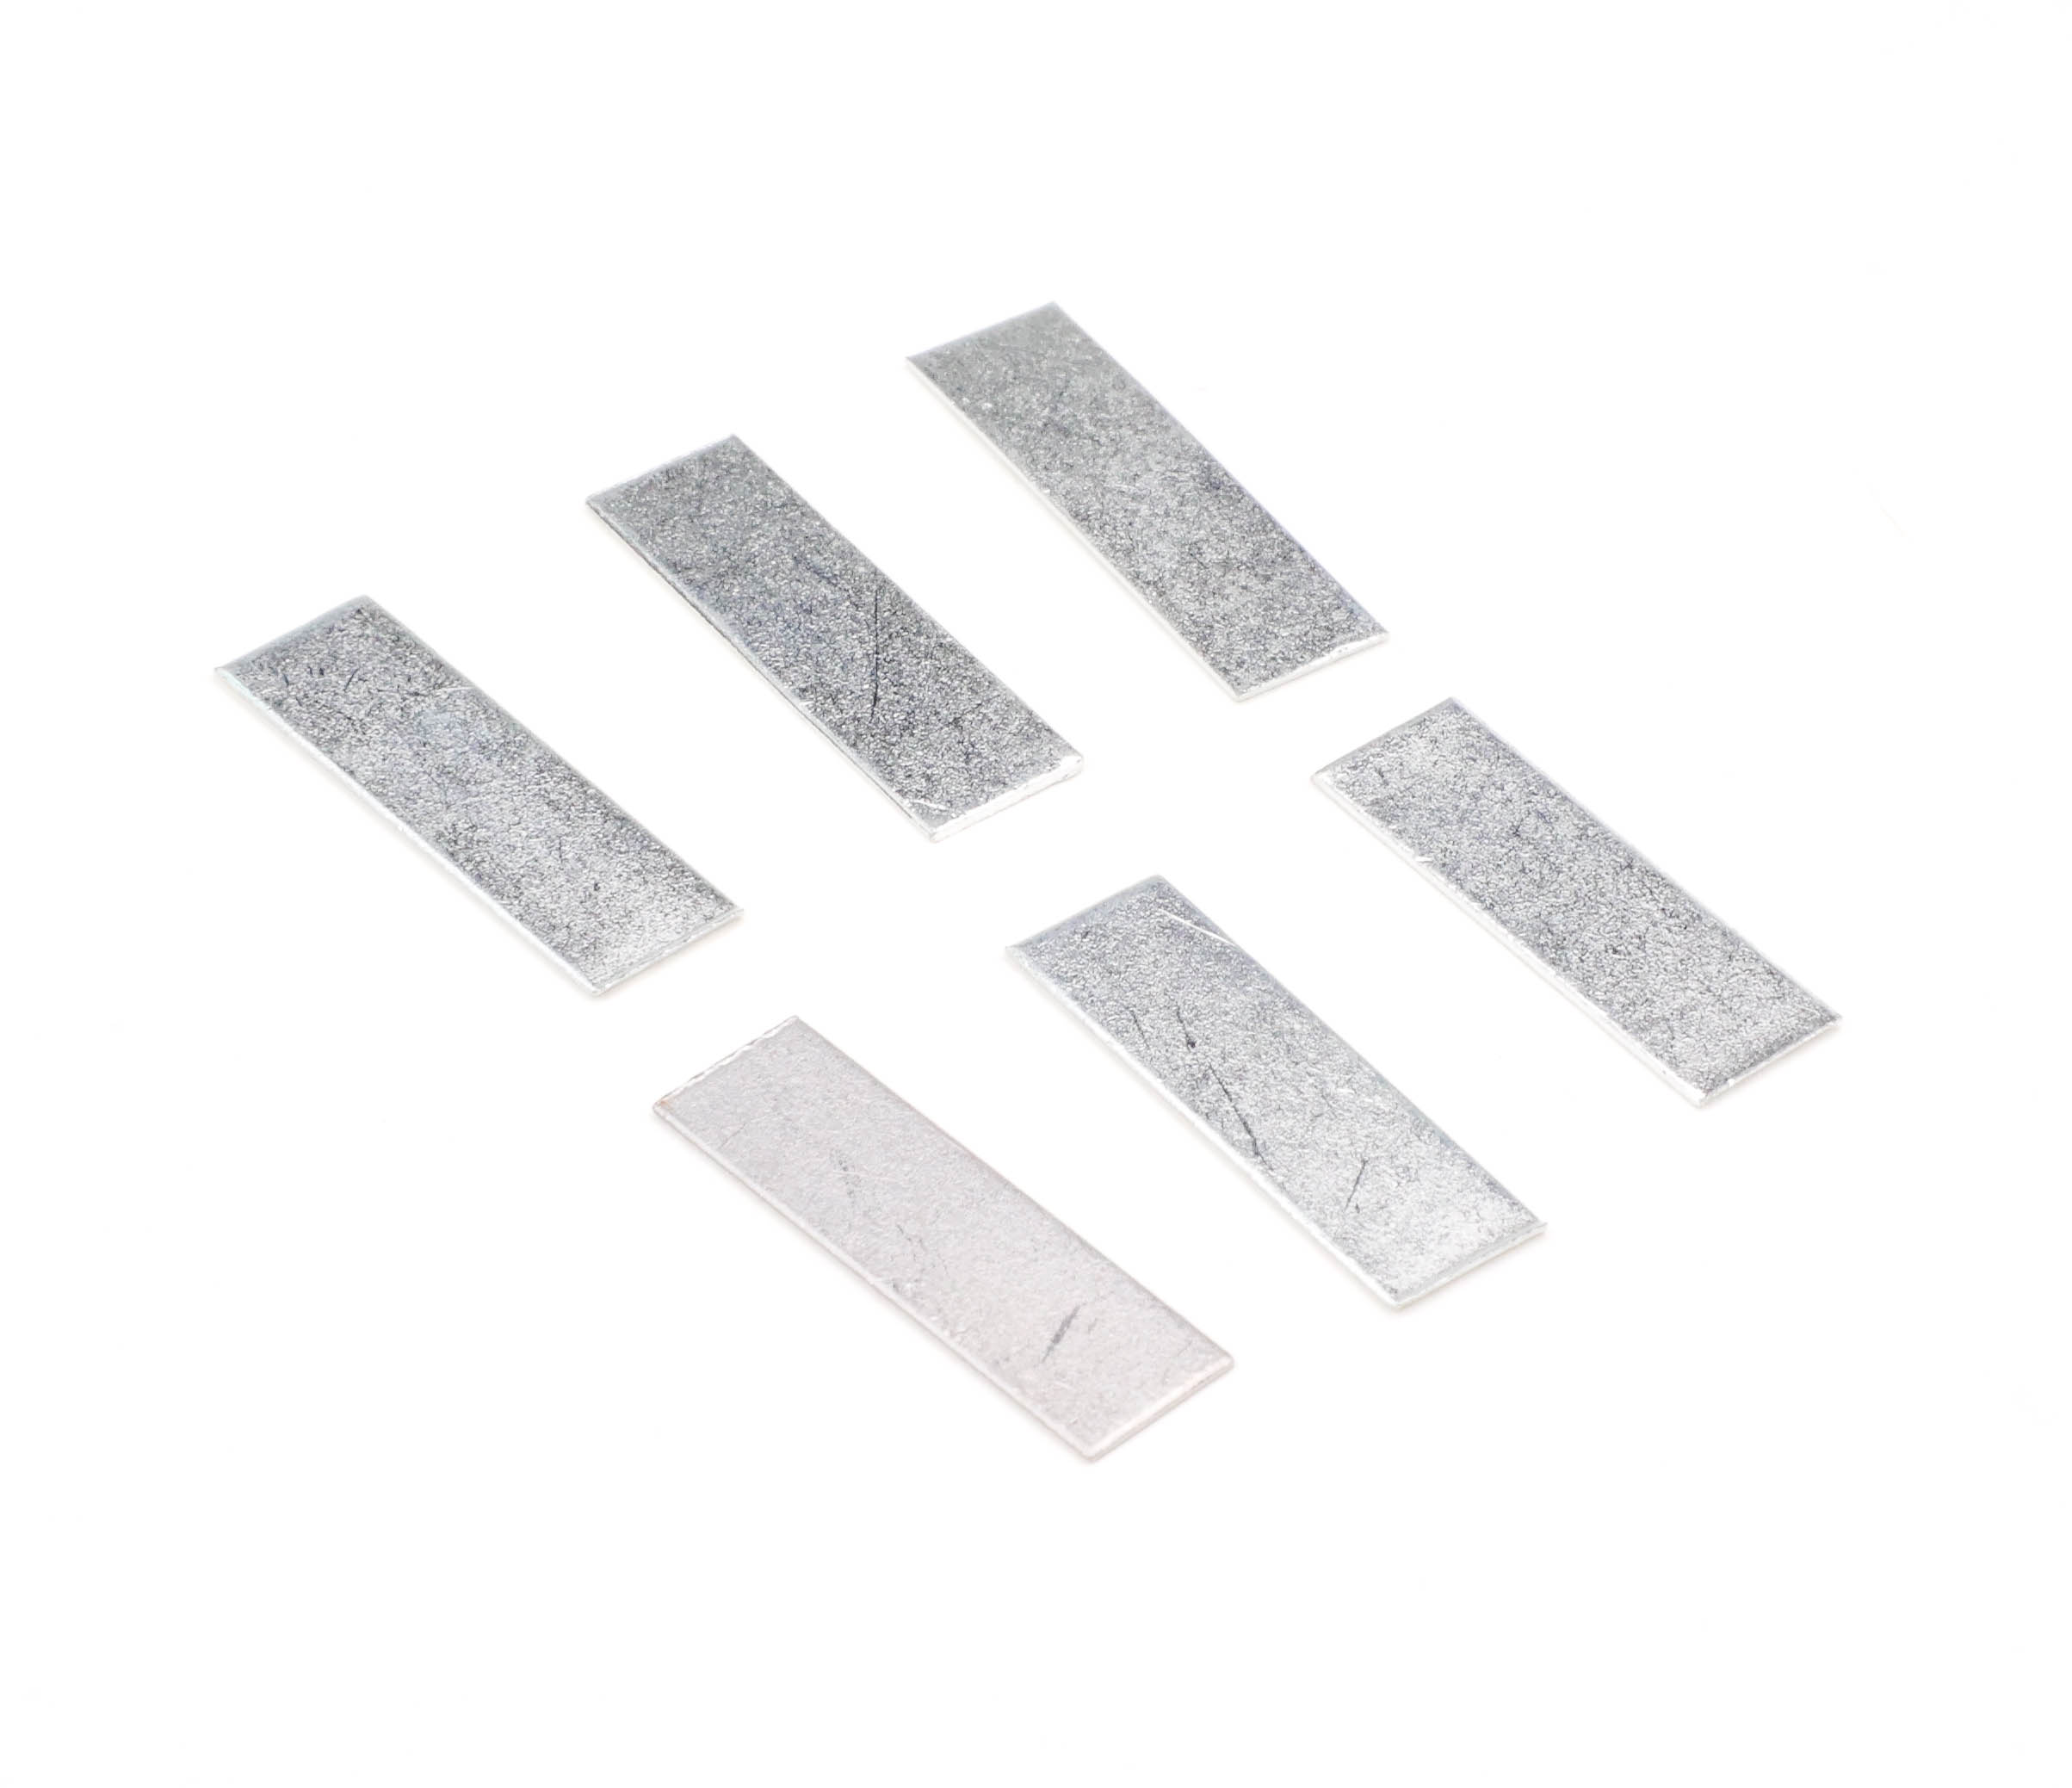 Pioneer MA200246 - Metal Shim for Magnet Strength, pack of 6